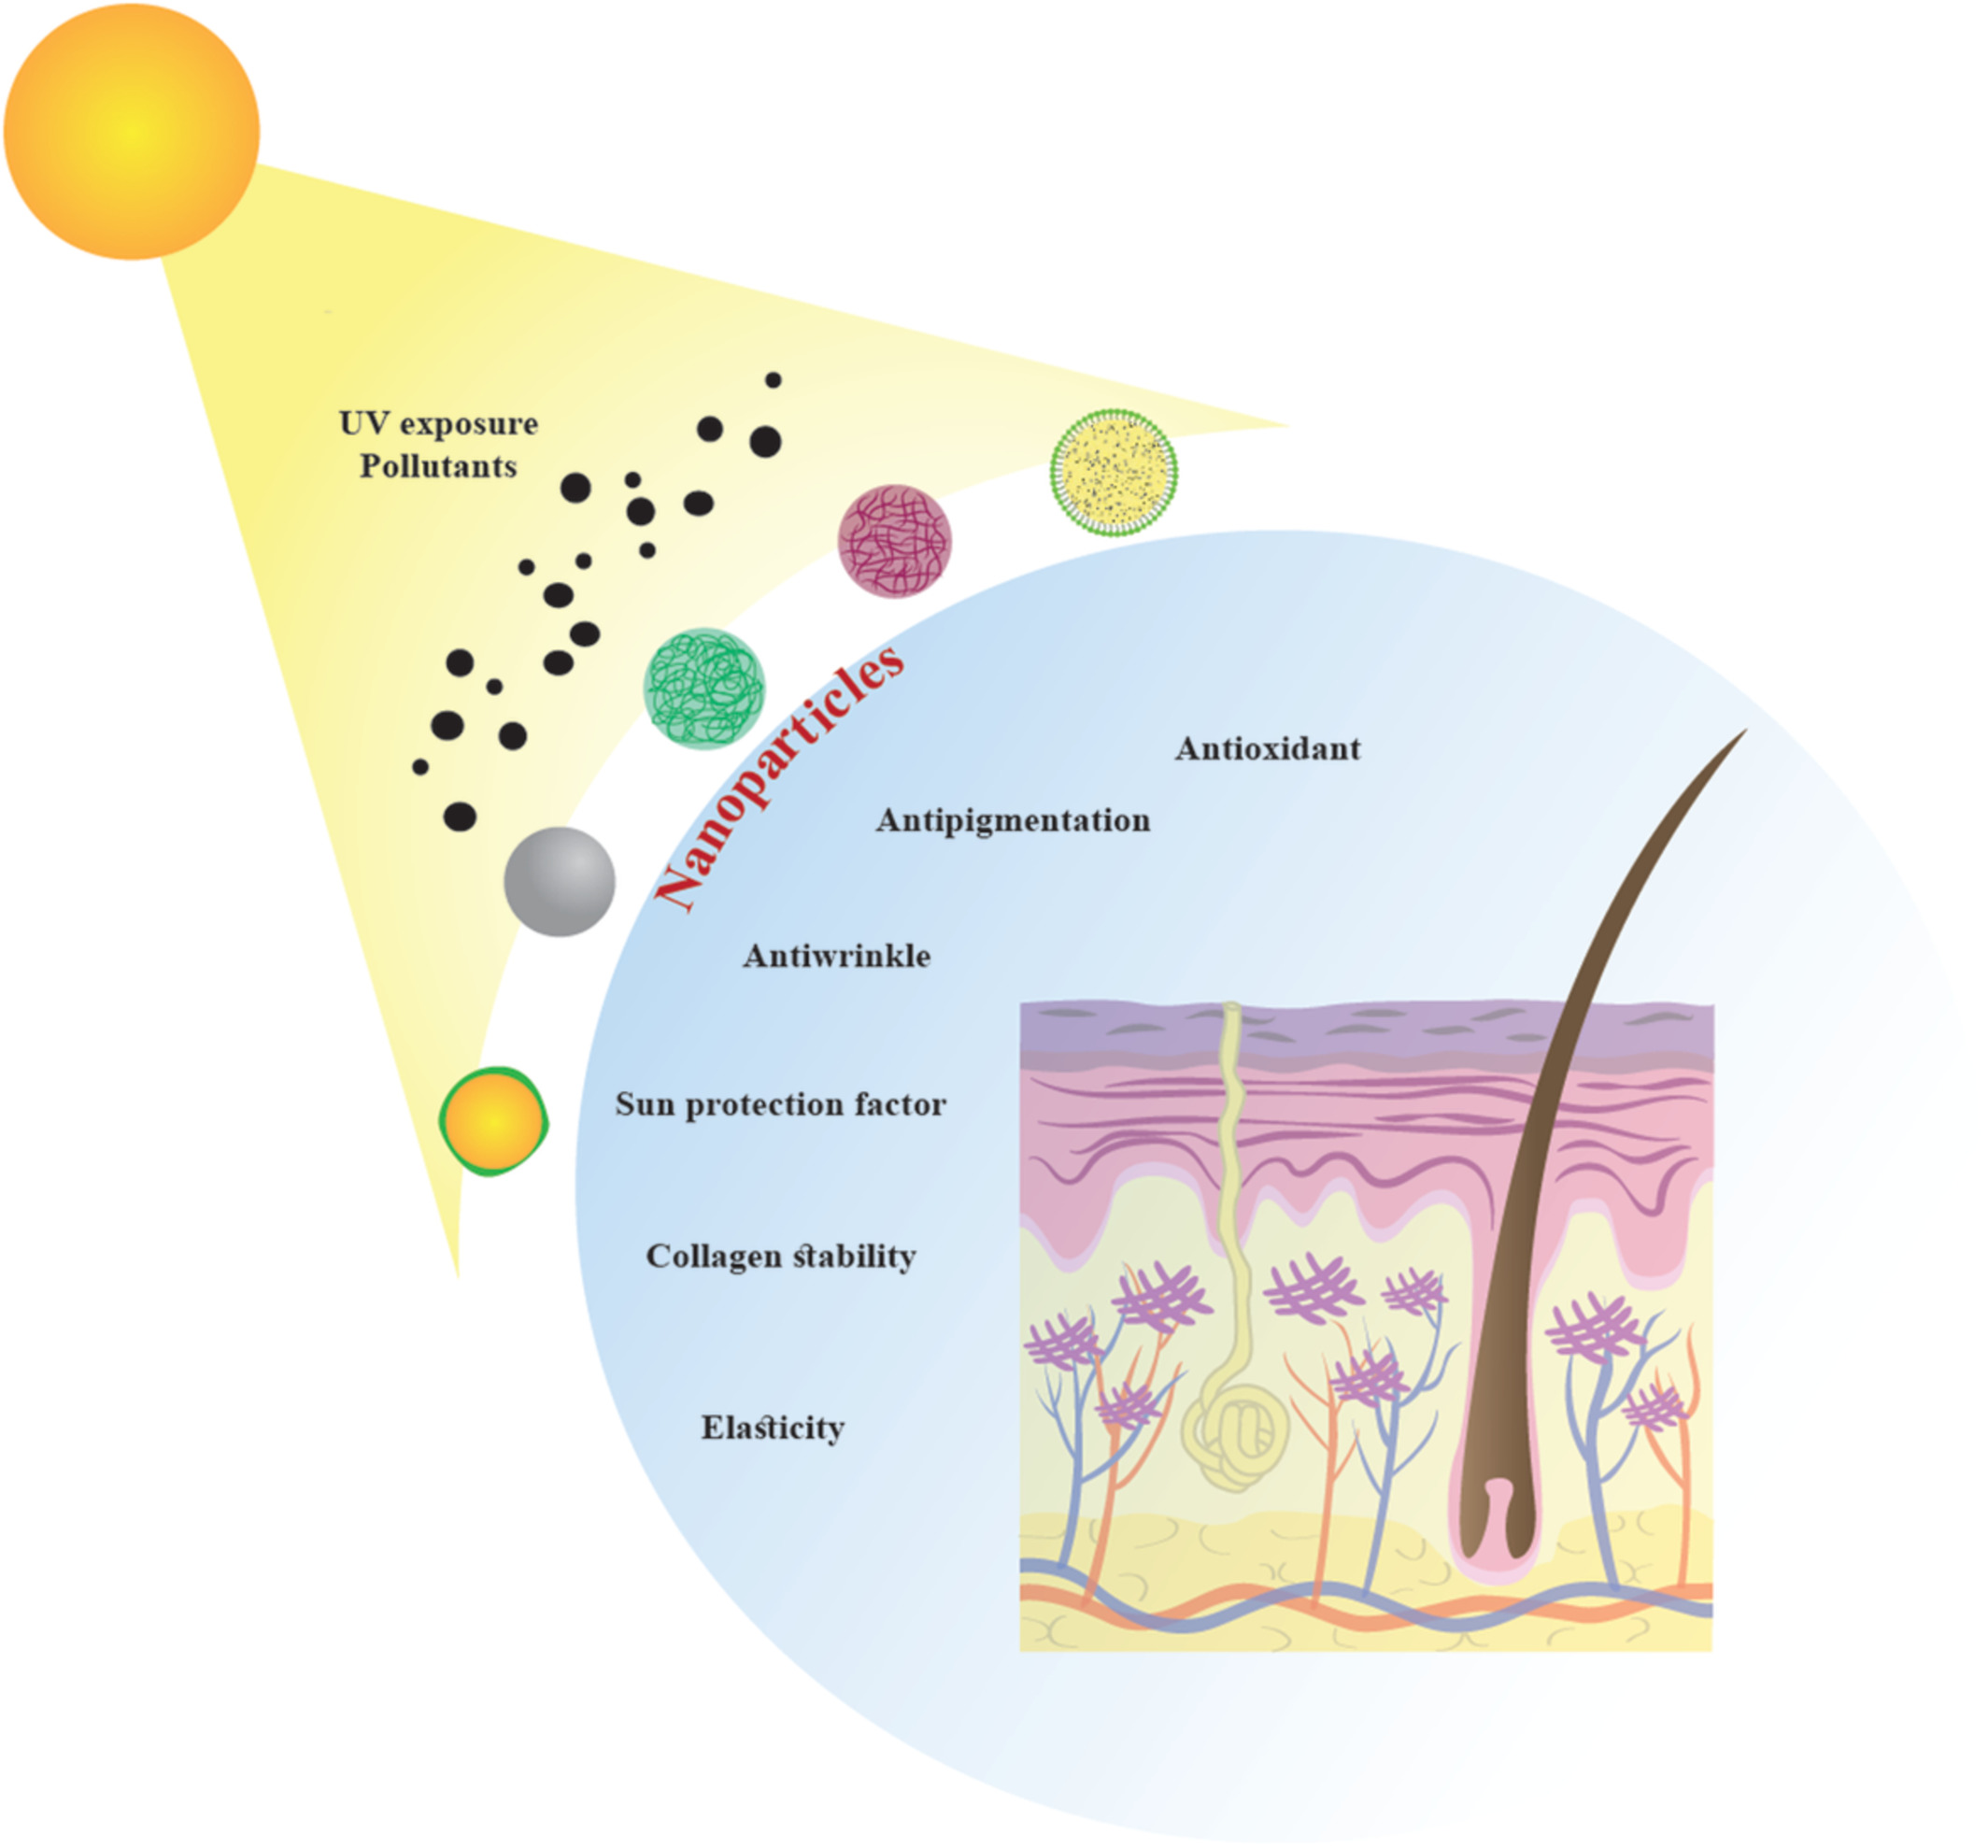 Nanoparticle platforms for dermal antiaging technologies: Insights in cellular and molecular mechanisms